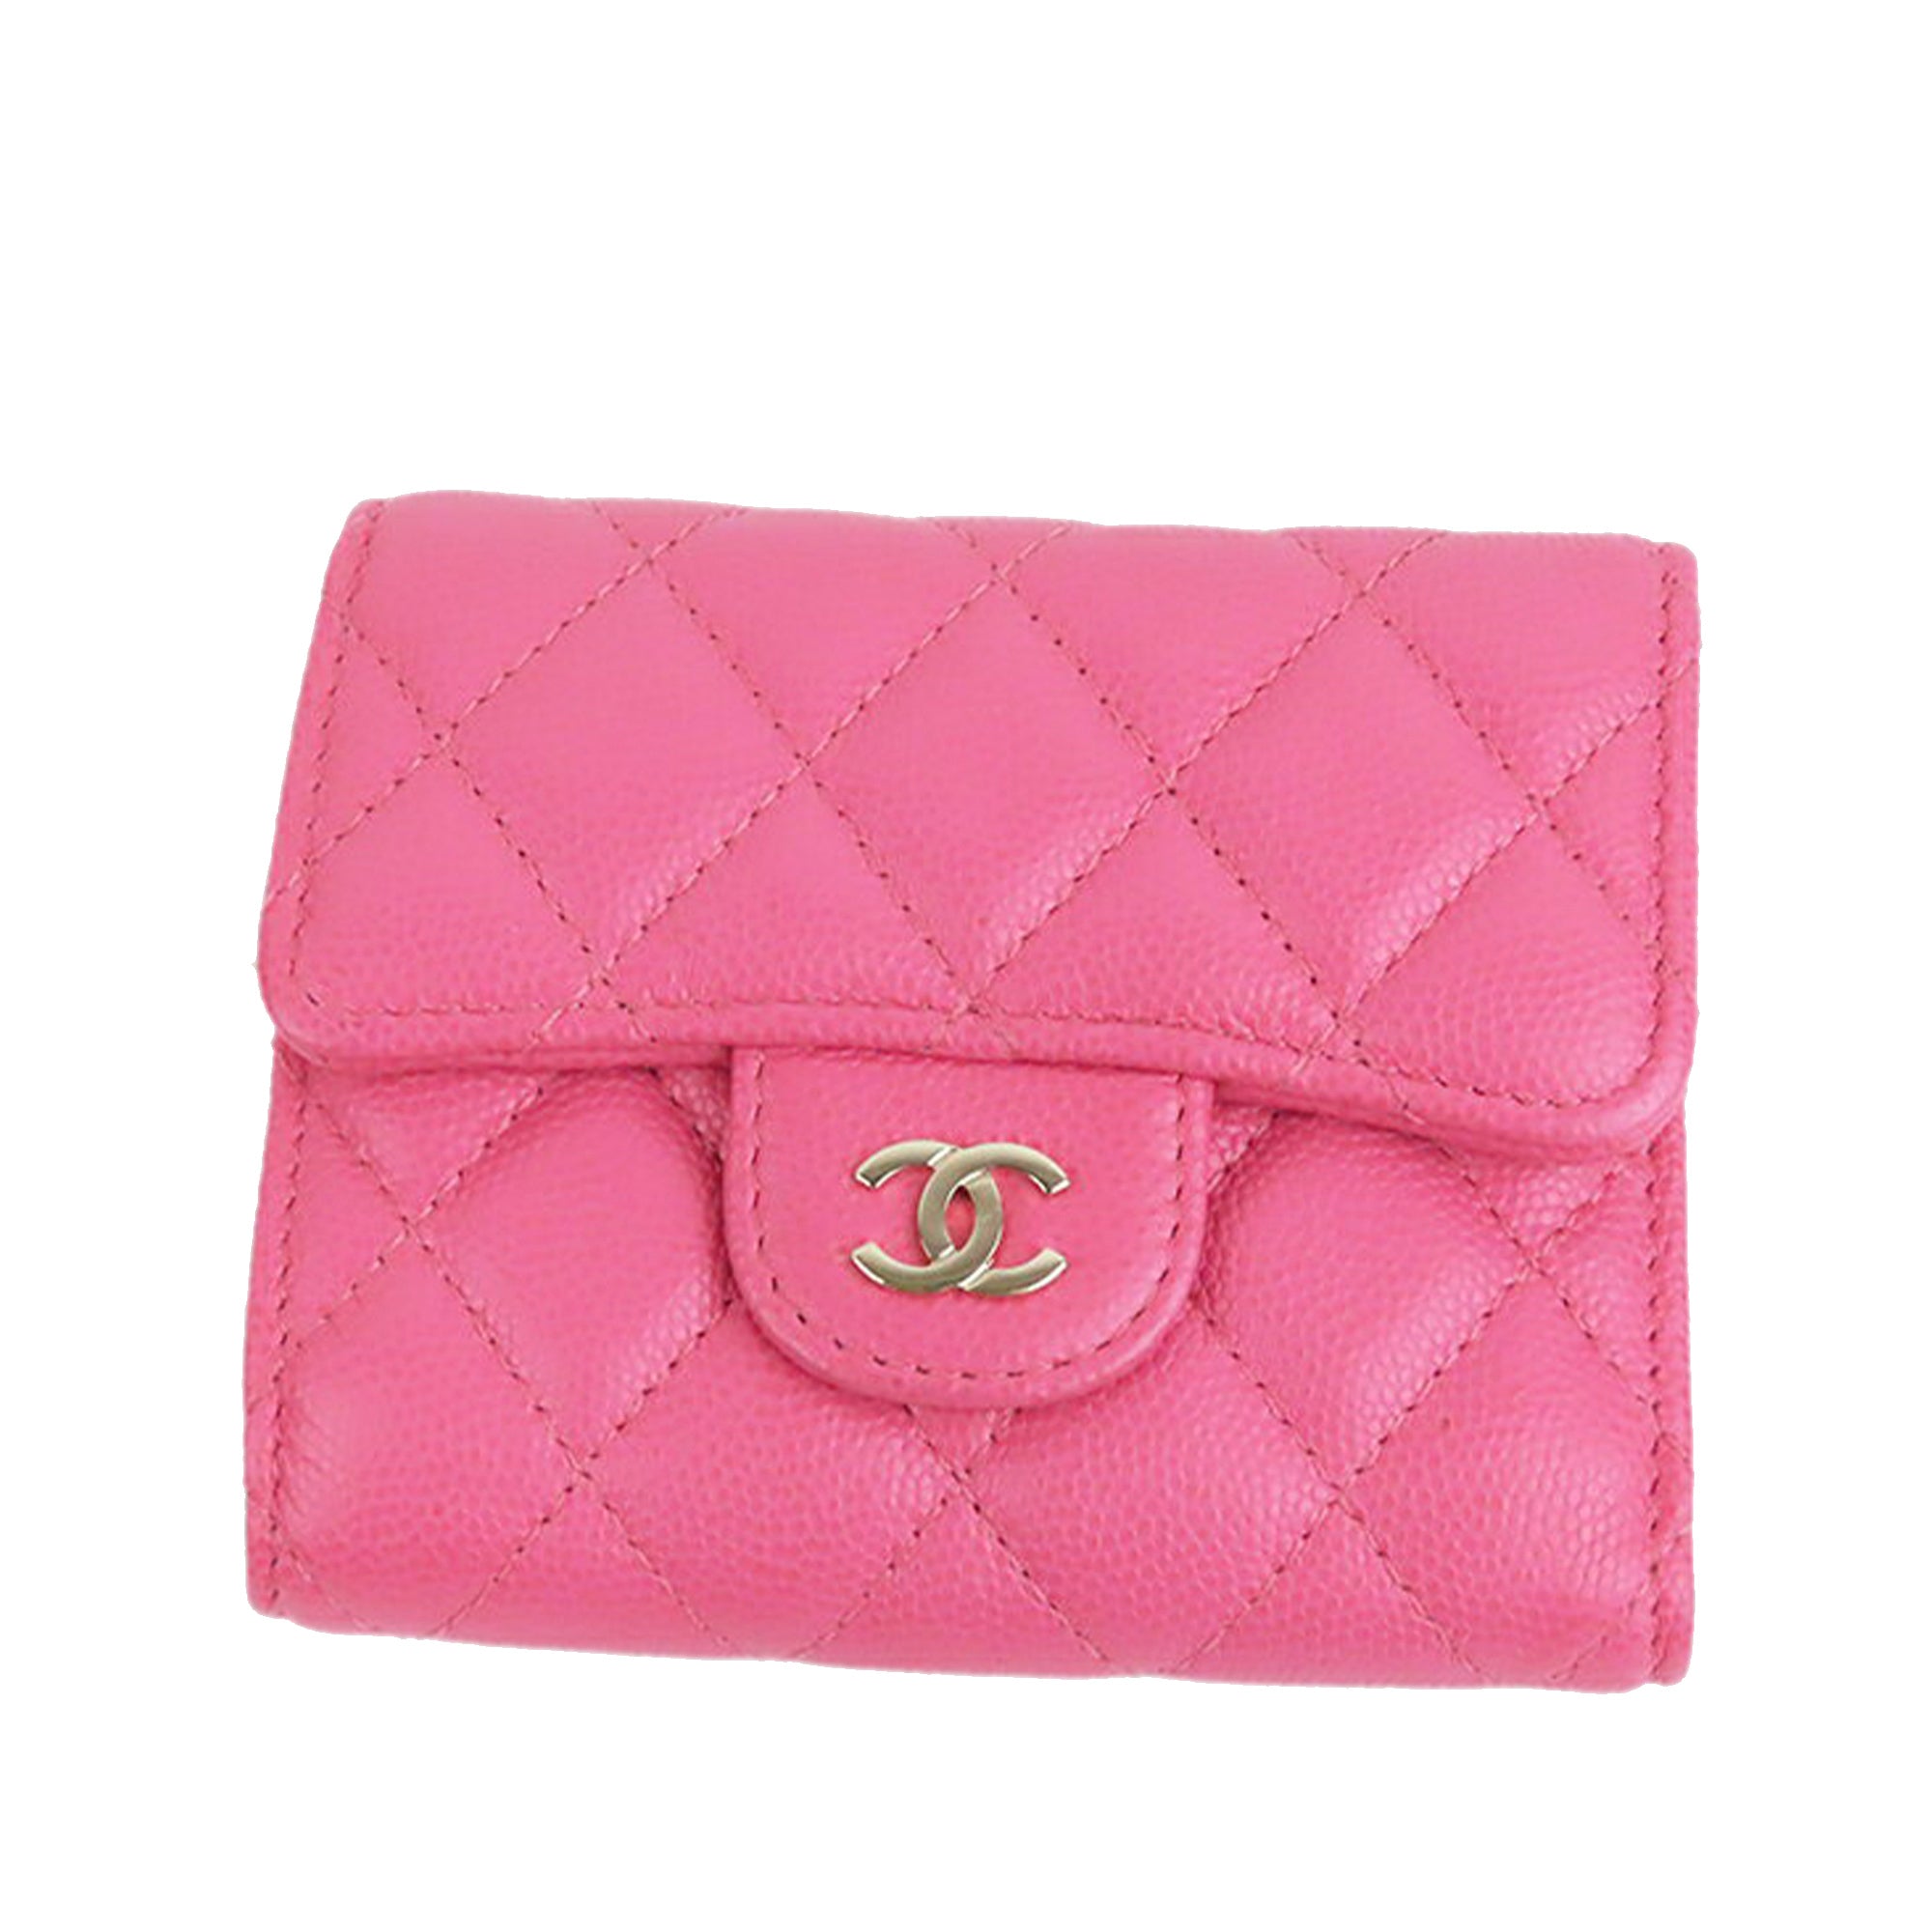 Converter Kit for Chanel Small Flap Wallet